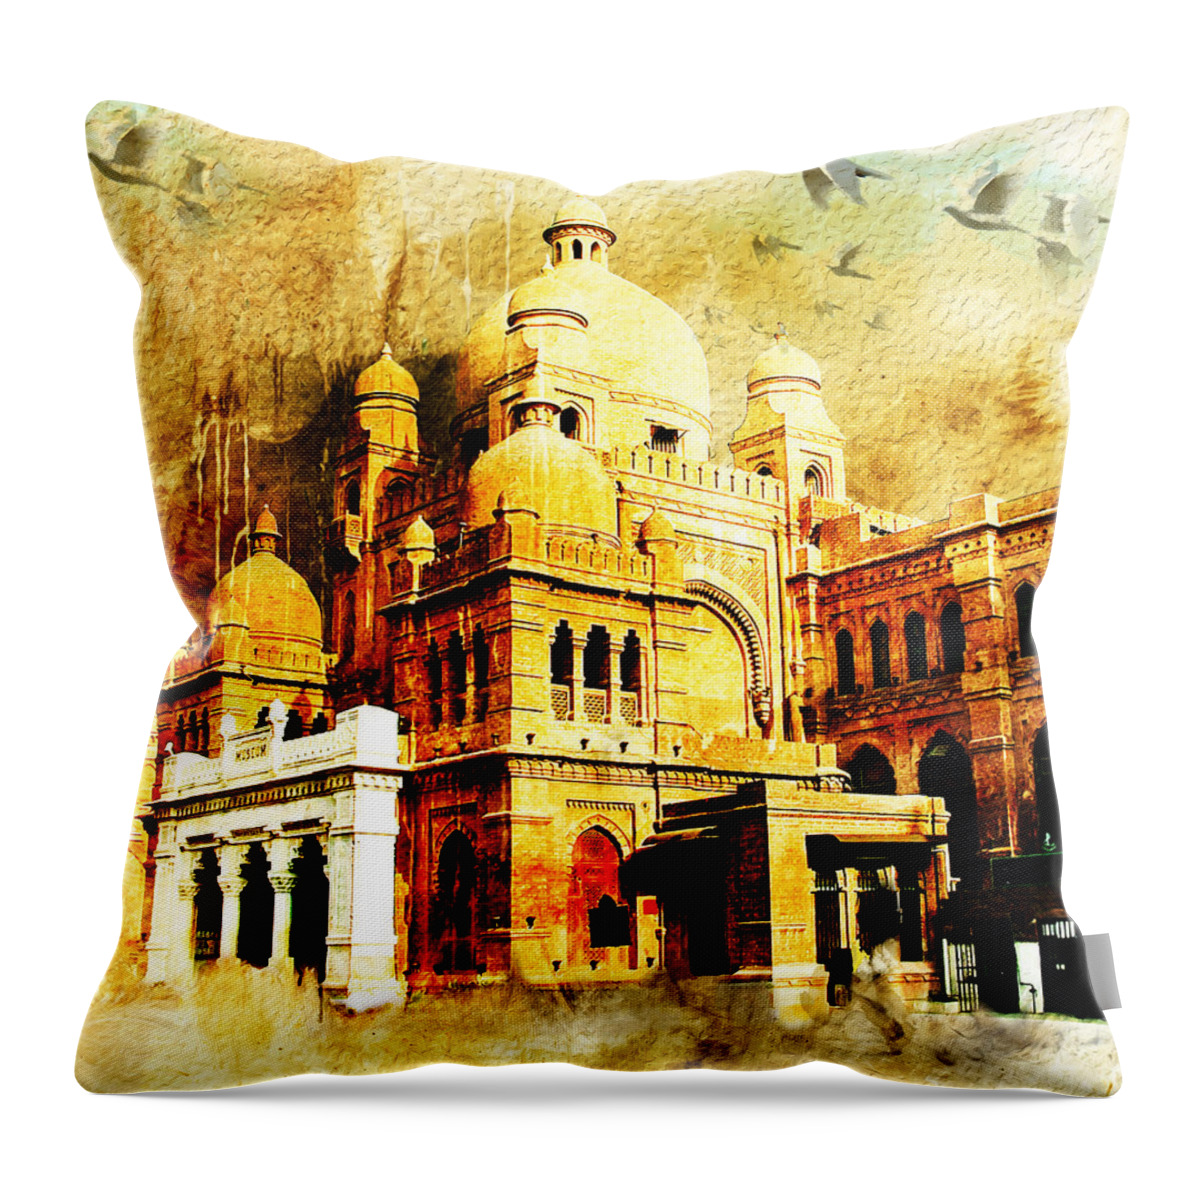 Pakistan Throw Pillow featuring the painting Lahore Museum by Catf